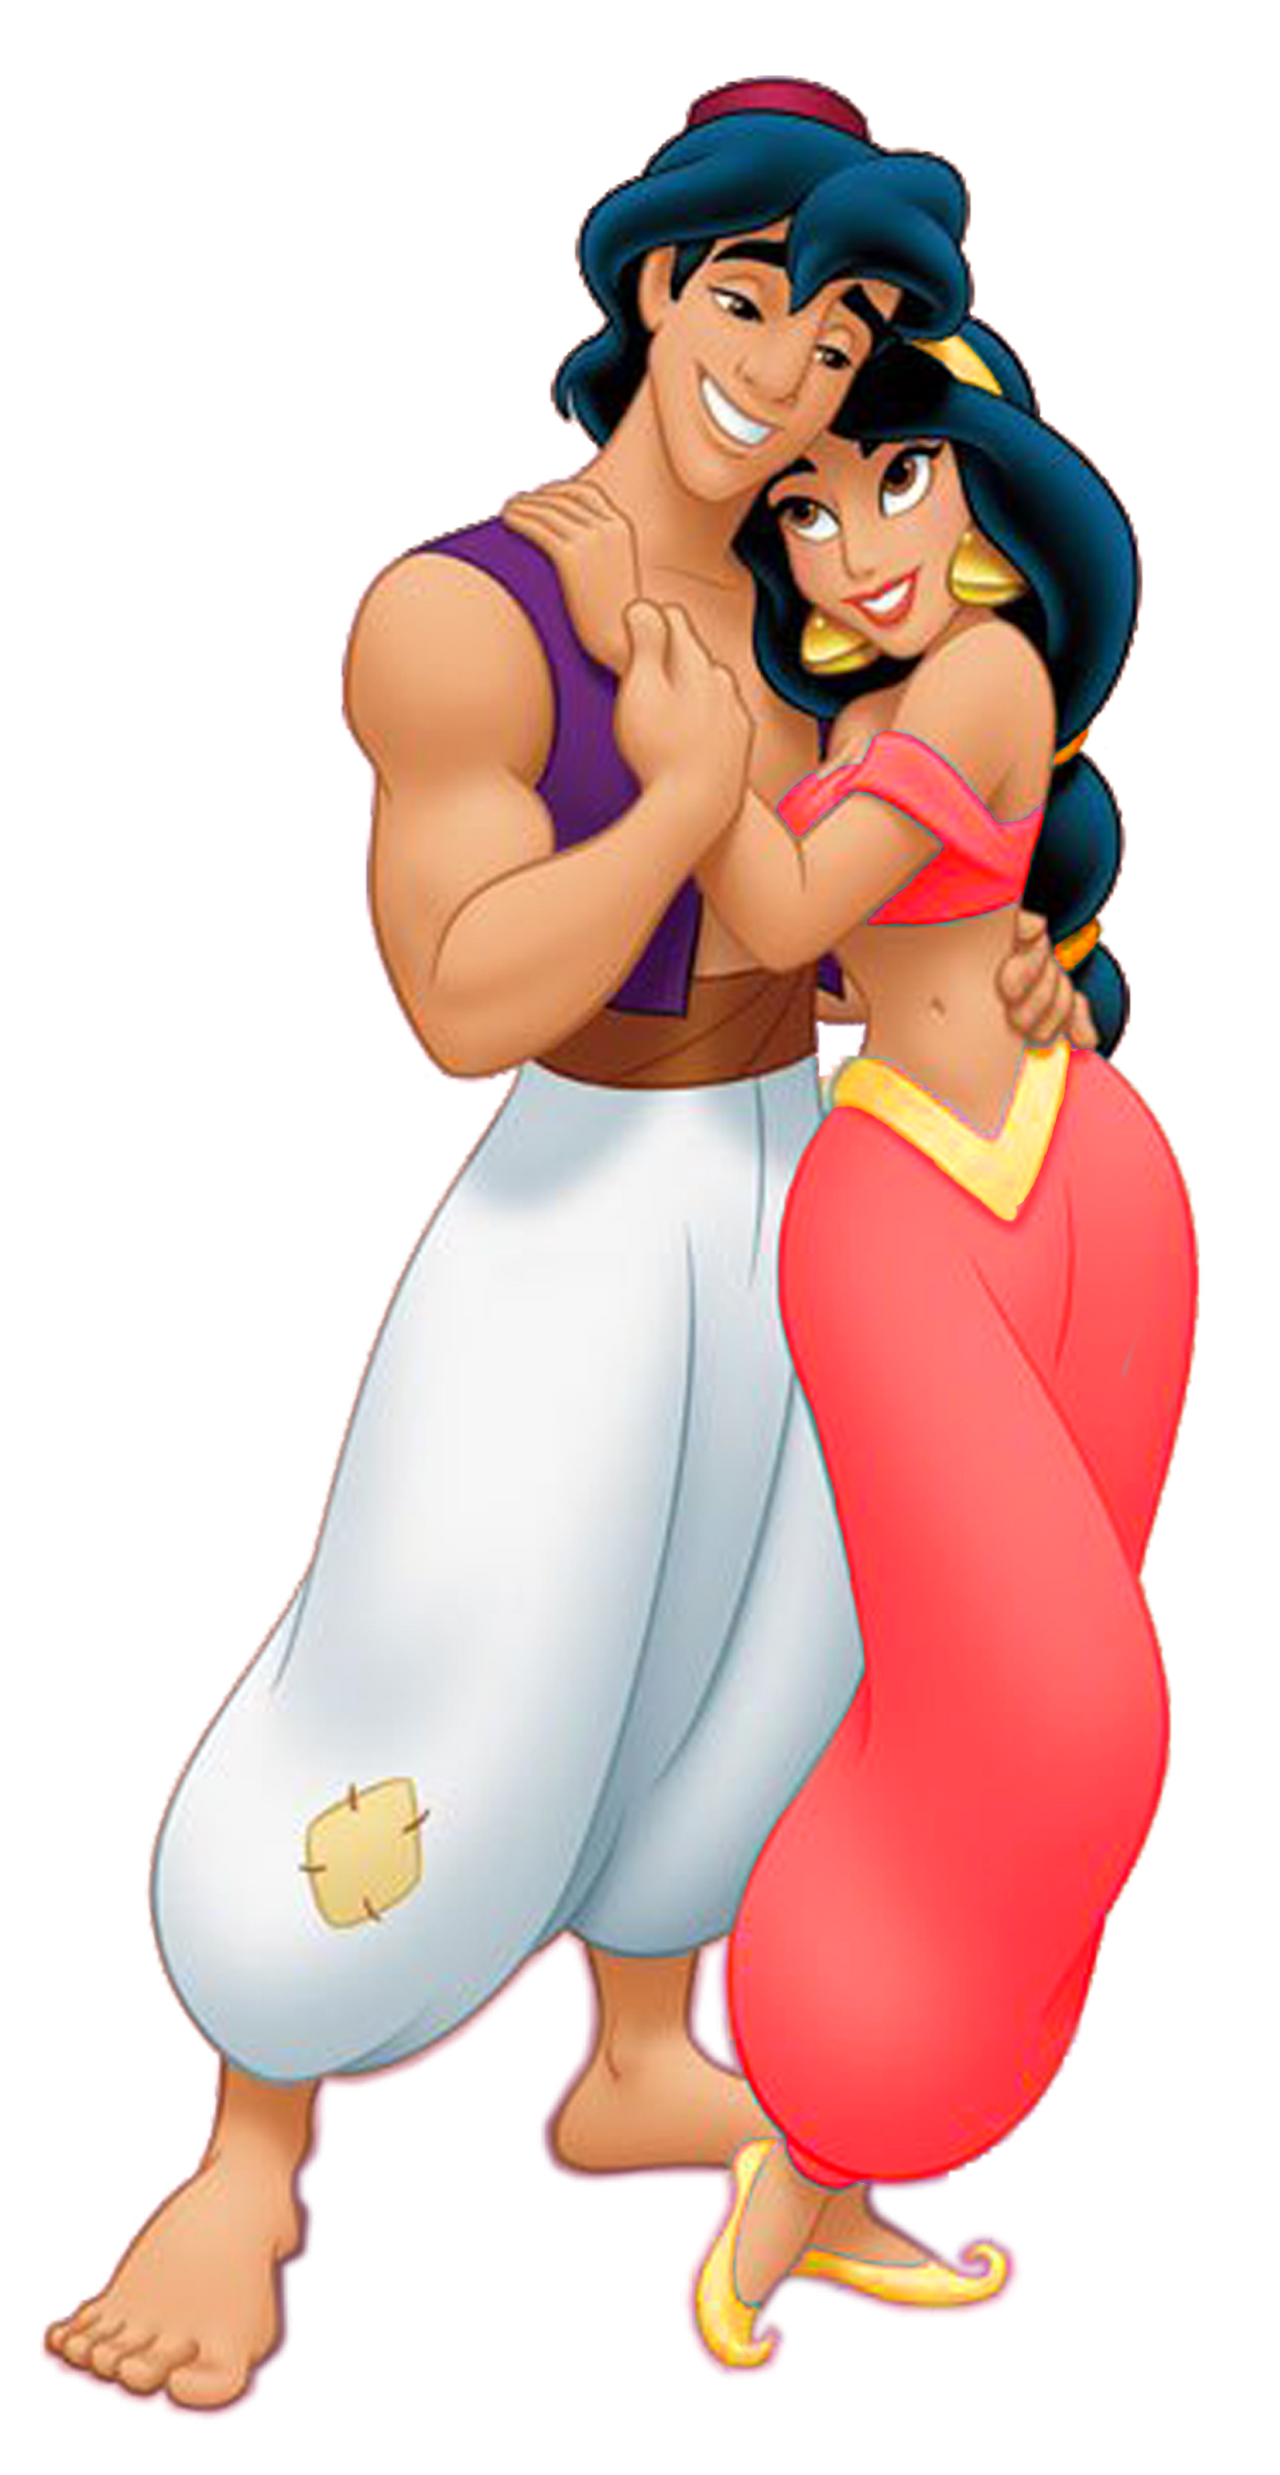 Aladdin and Jasmine in Red #2 by MermaidMelodyEdits on DeviantArt